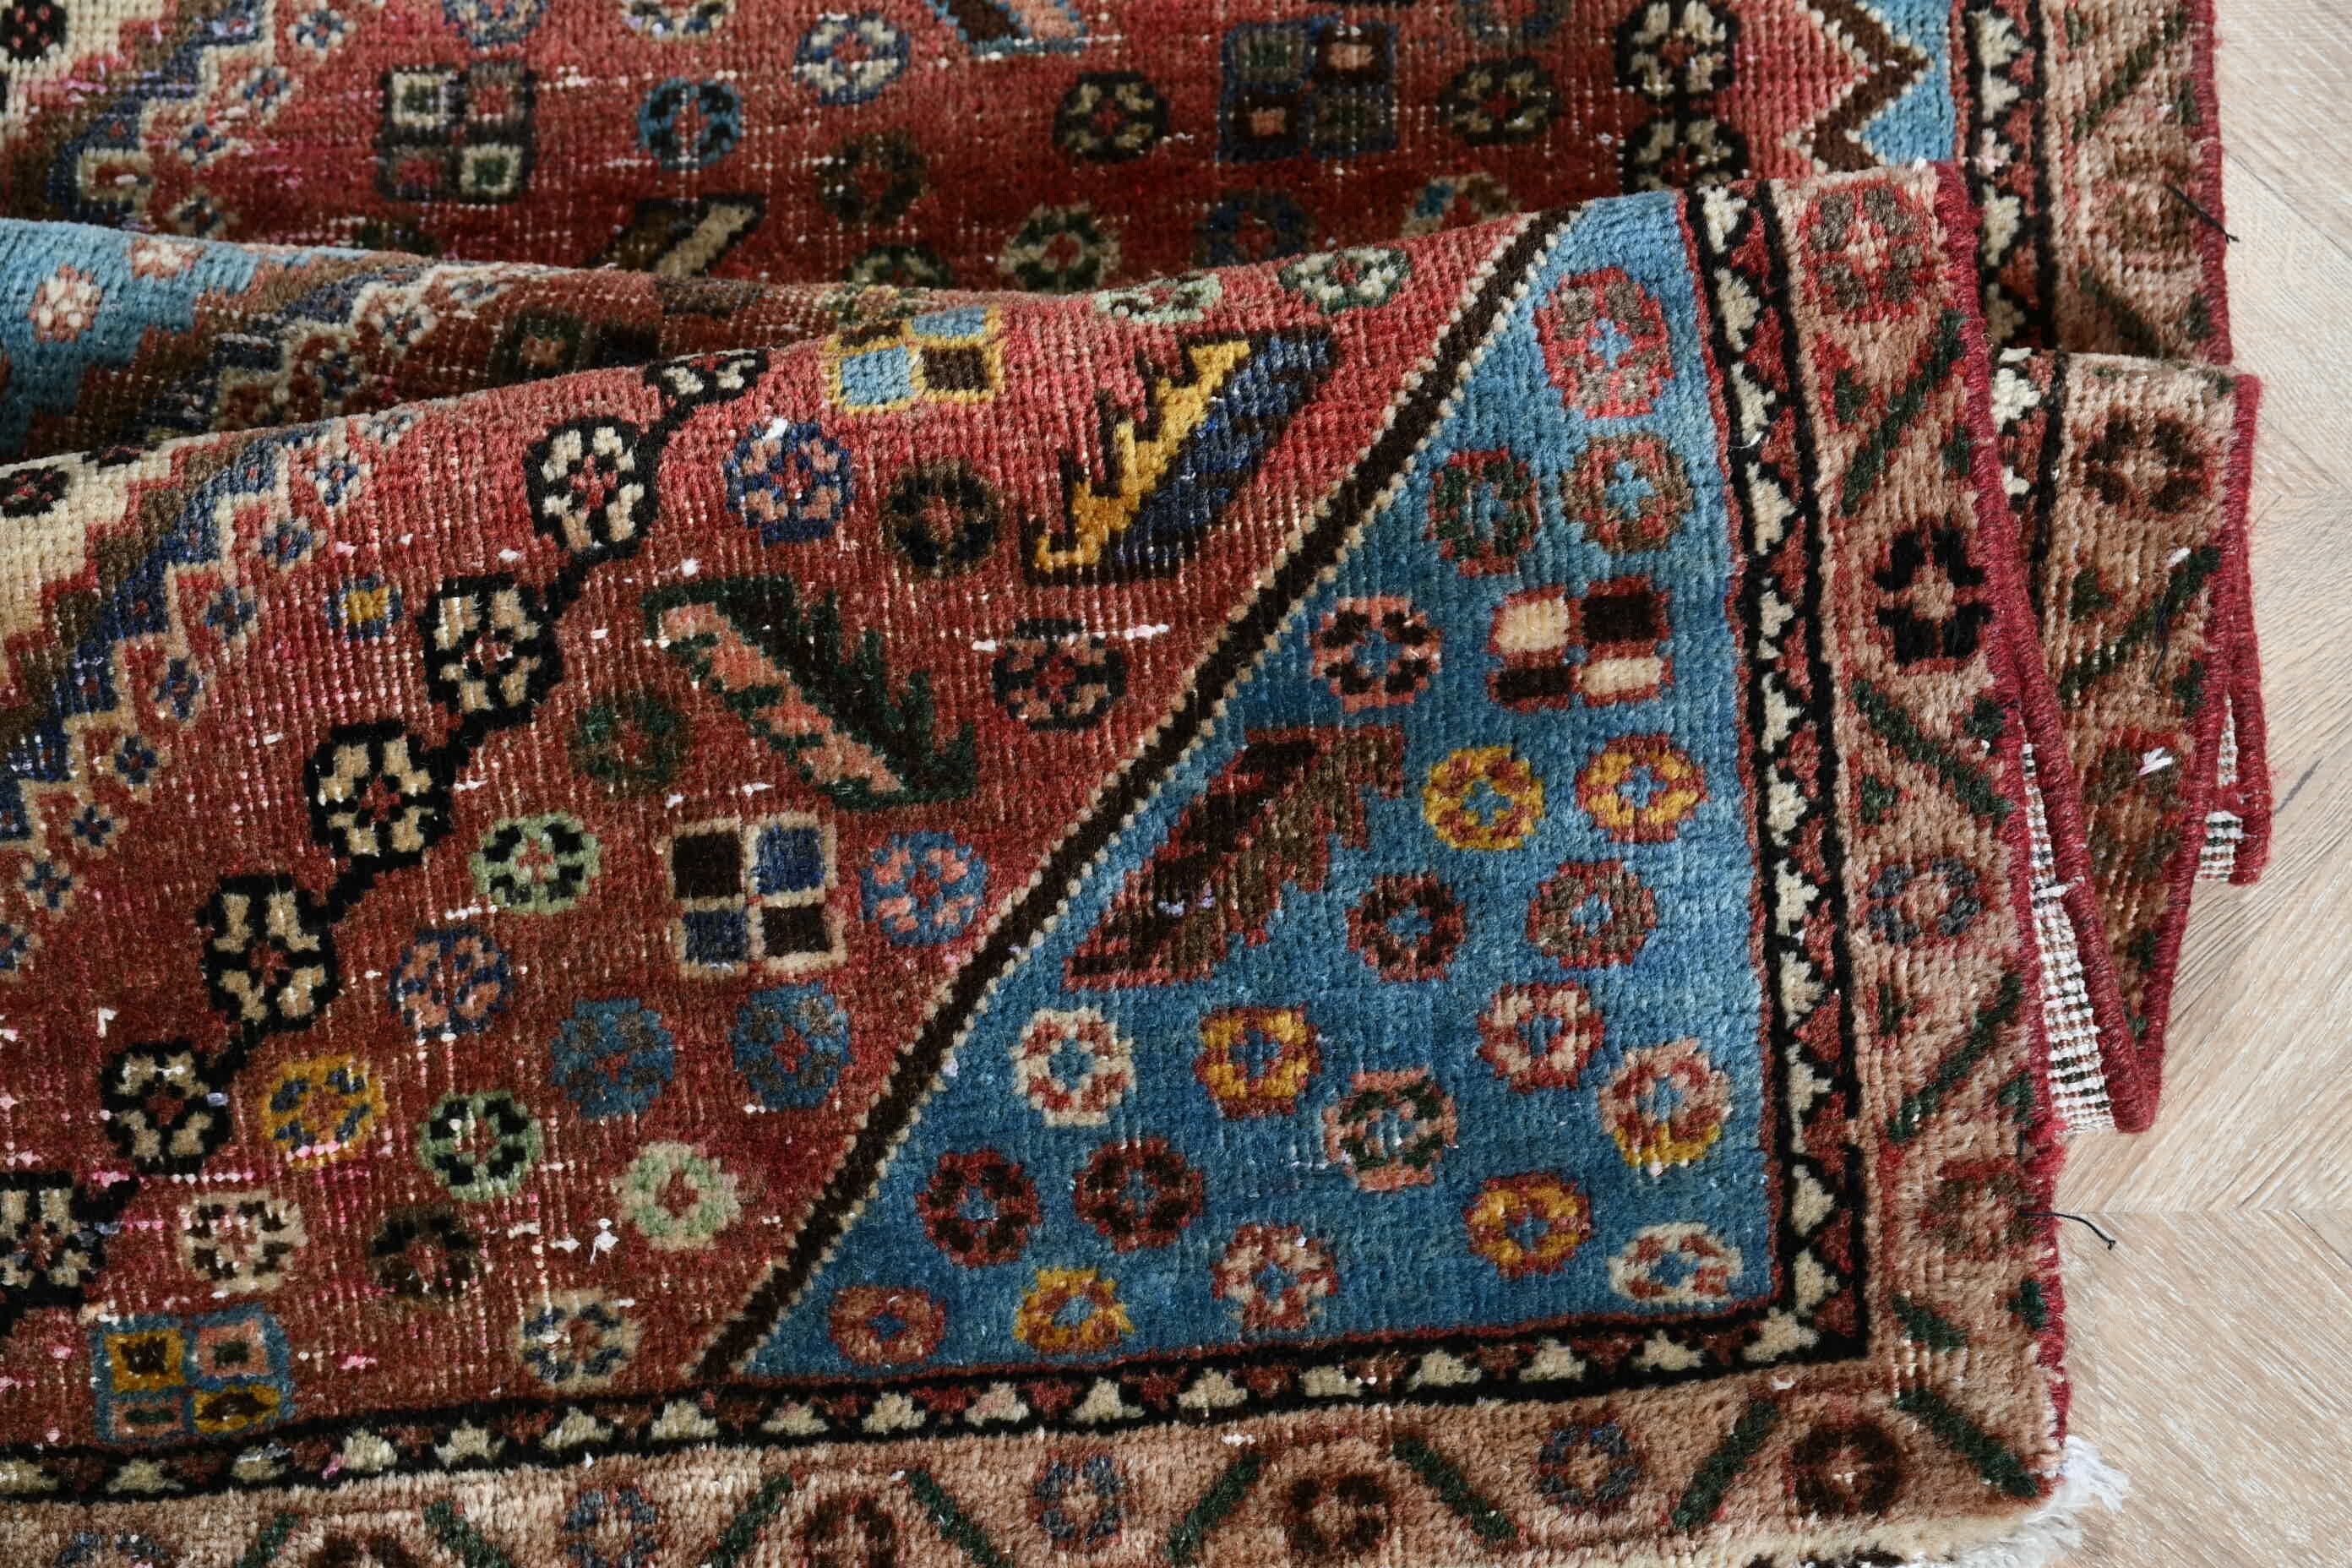 Red Oushak Rug, Vintage Rug, Bedroom Rug, Rugs for Entry, Office Rugs, 3.9x6.1 ft Accent Rug, Entry Rugs, Turkish Rugs, Antique Rug